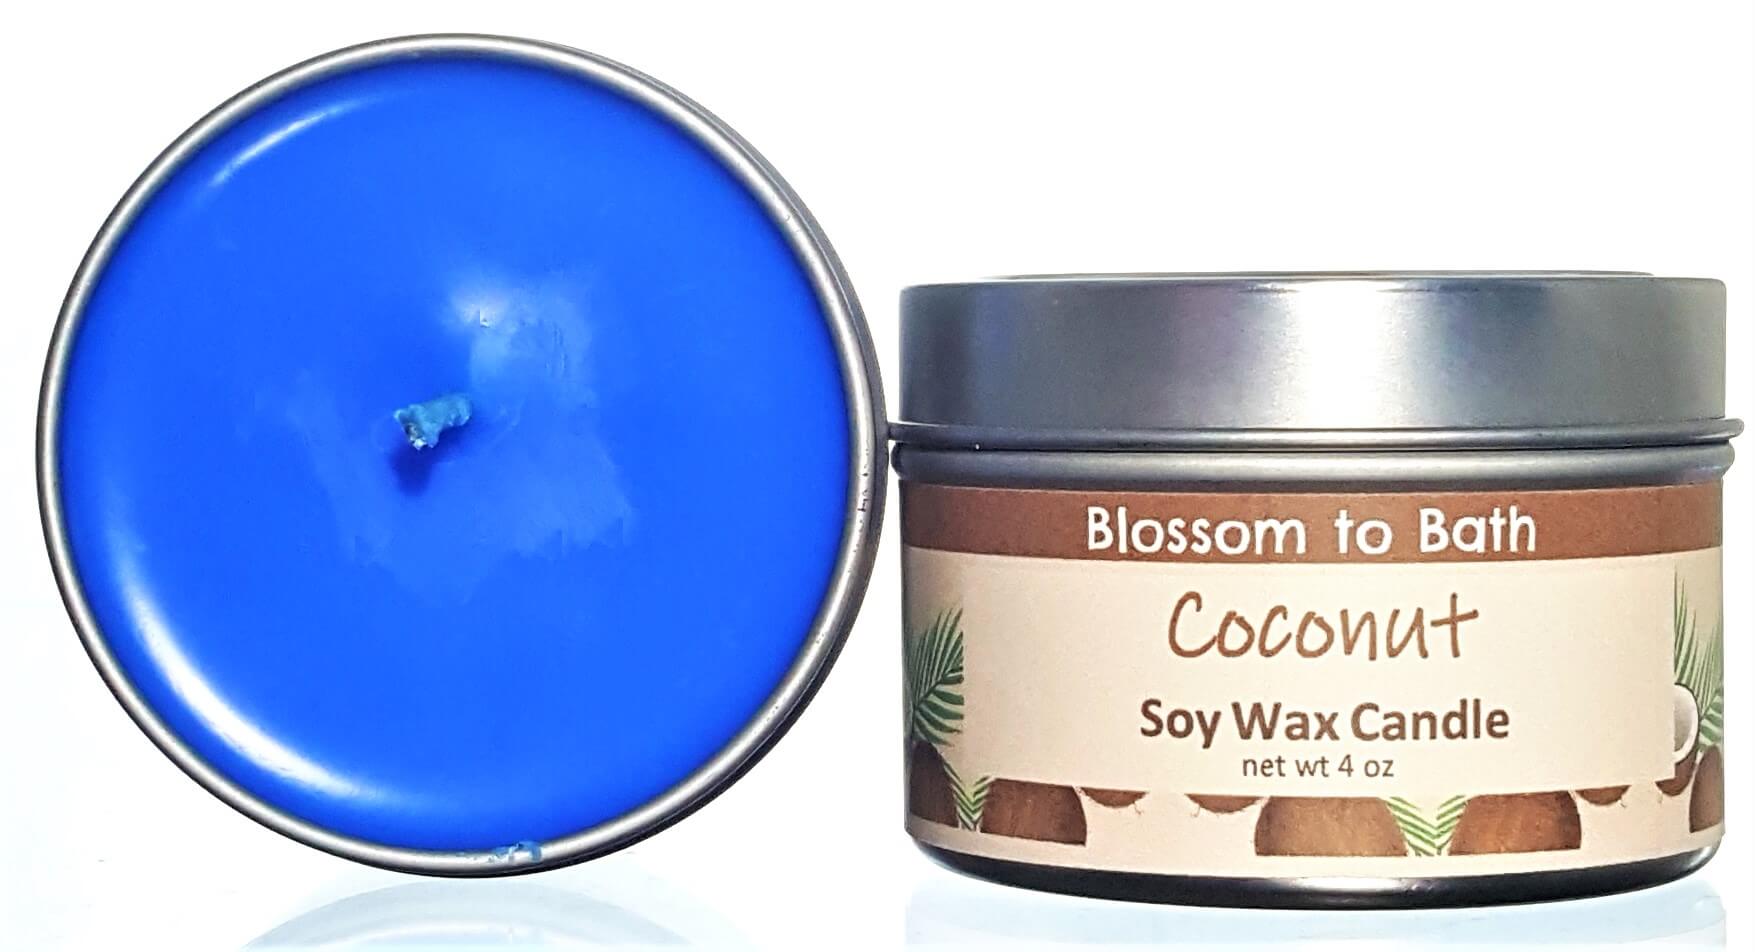 Buy Blossom to Bath Coconut Soy Wax Candle from Flowersong Soap Studio.  Fill the air with a charming fragrance that lasts for hours  Bold coconut swirled with tropical fruit.